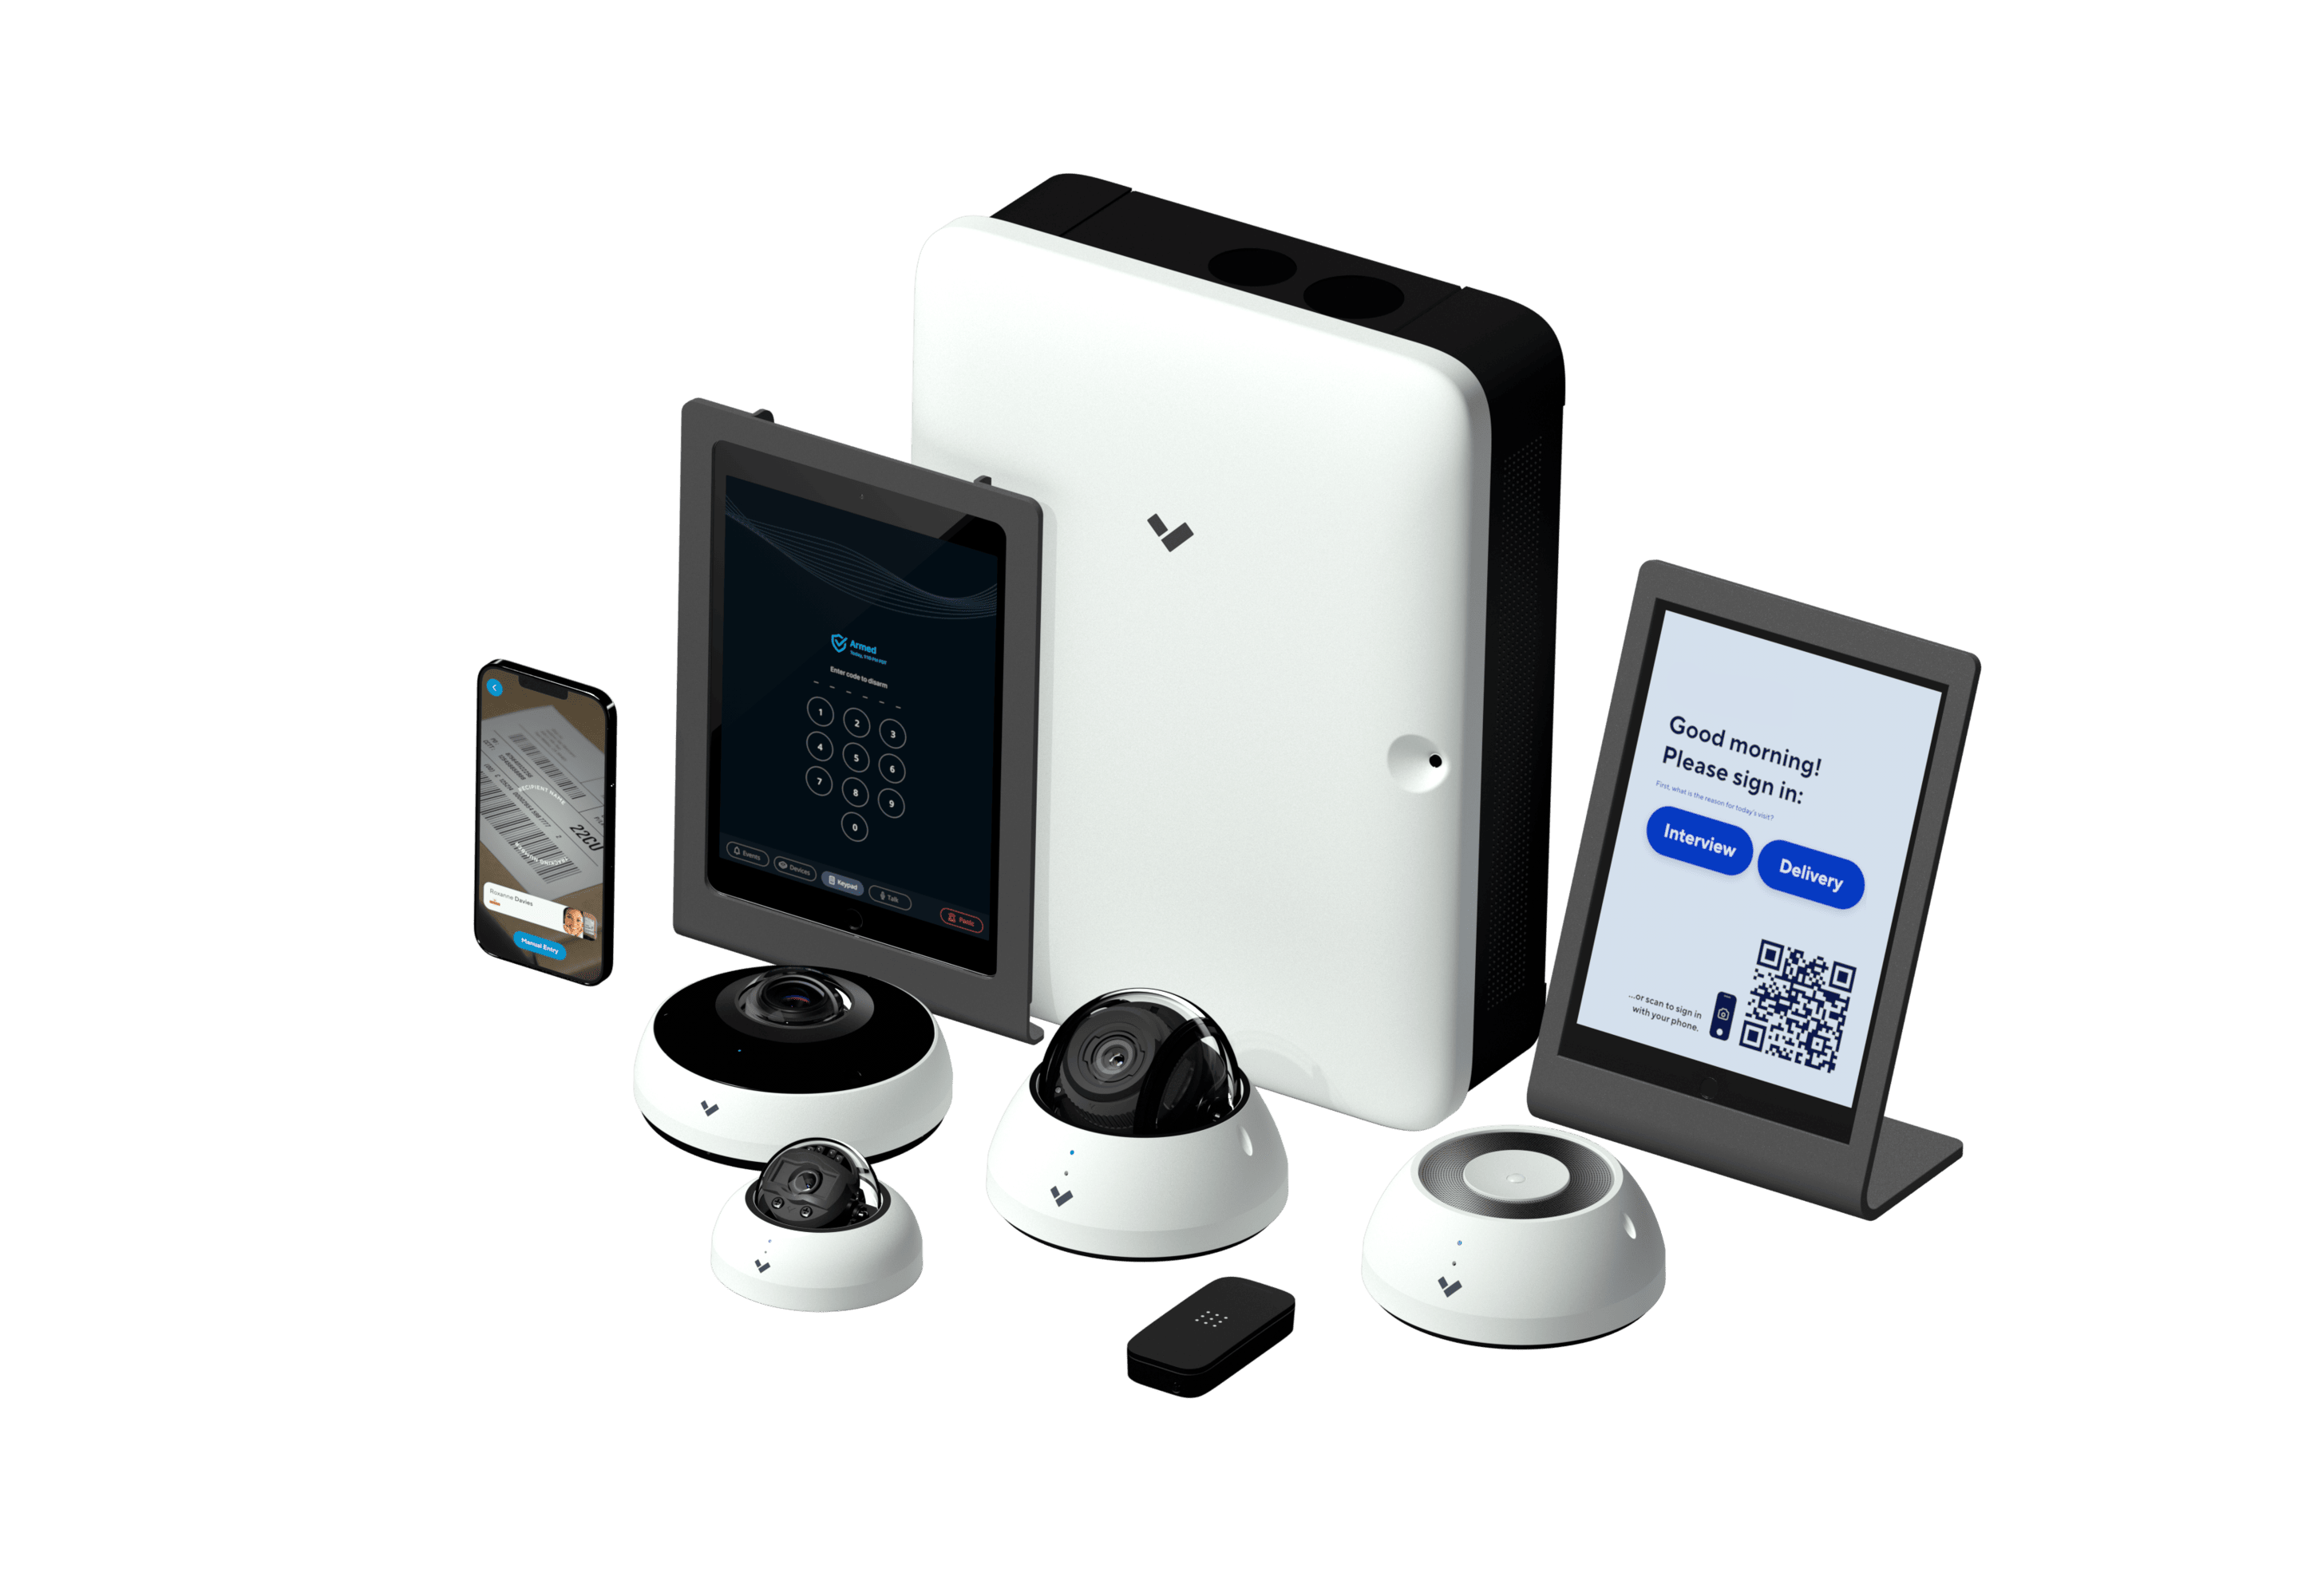 Verkada device family including wireless access control devices